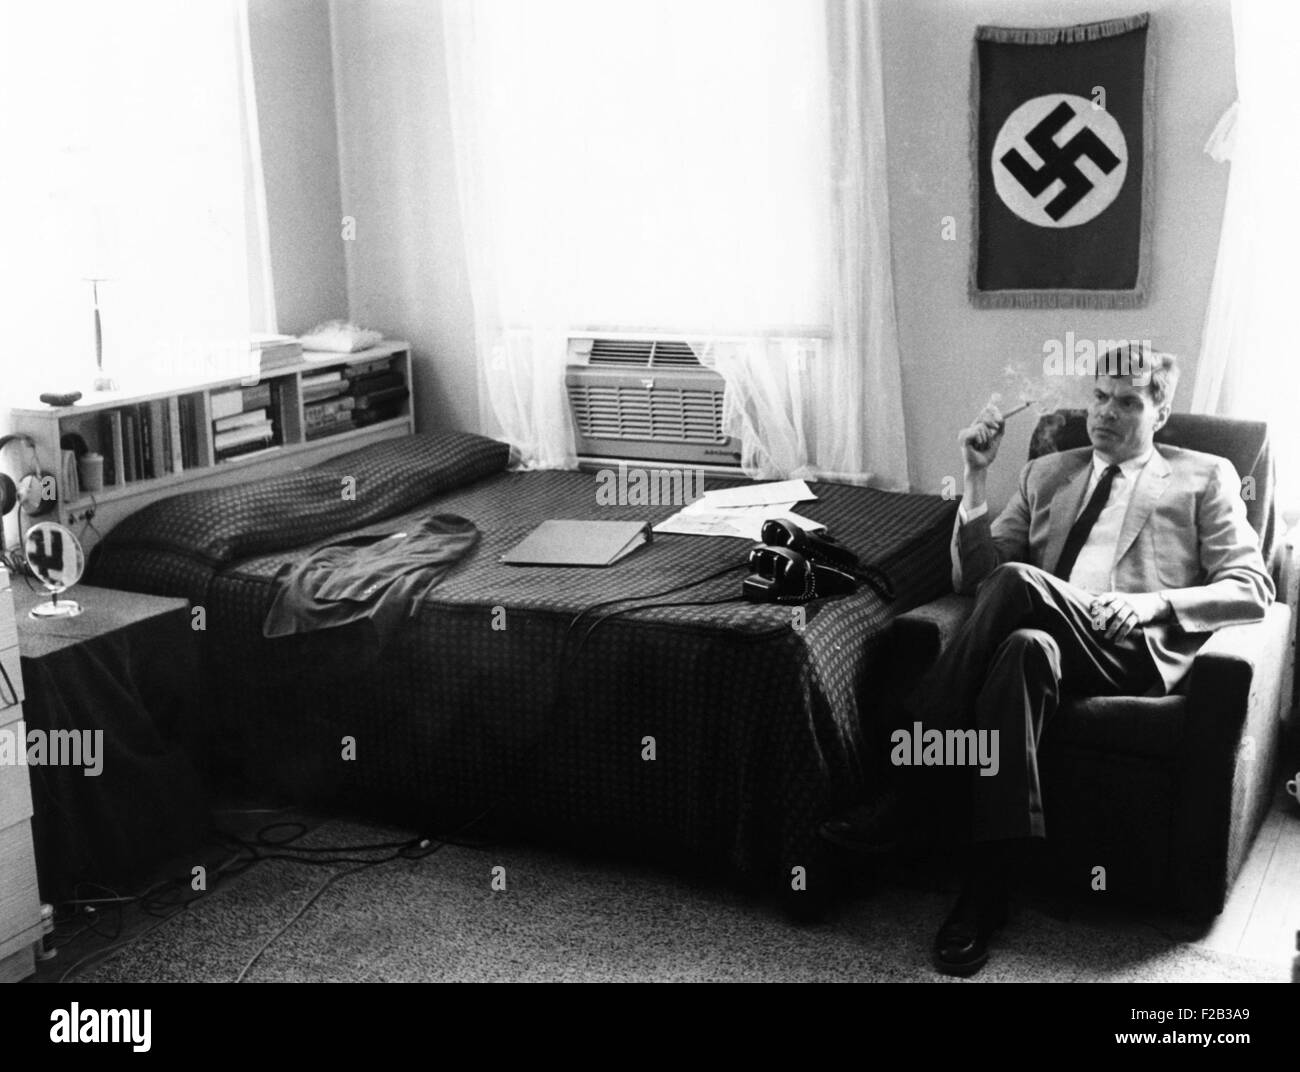 American Nazi George Lincoln Rockwell in the bedroom of his Arlington, Virginia, 'headquarter and barracks'. June 5, 1965. He was intelligent and well educational in philosophy and served in nineteen years in the U.S. Military. In 1960, as a result of his political and racist activities, the U. S. Navy discharged Rockwell one year short of retirement. - (CSU 2015 6 210) Stock Photo